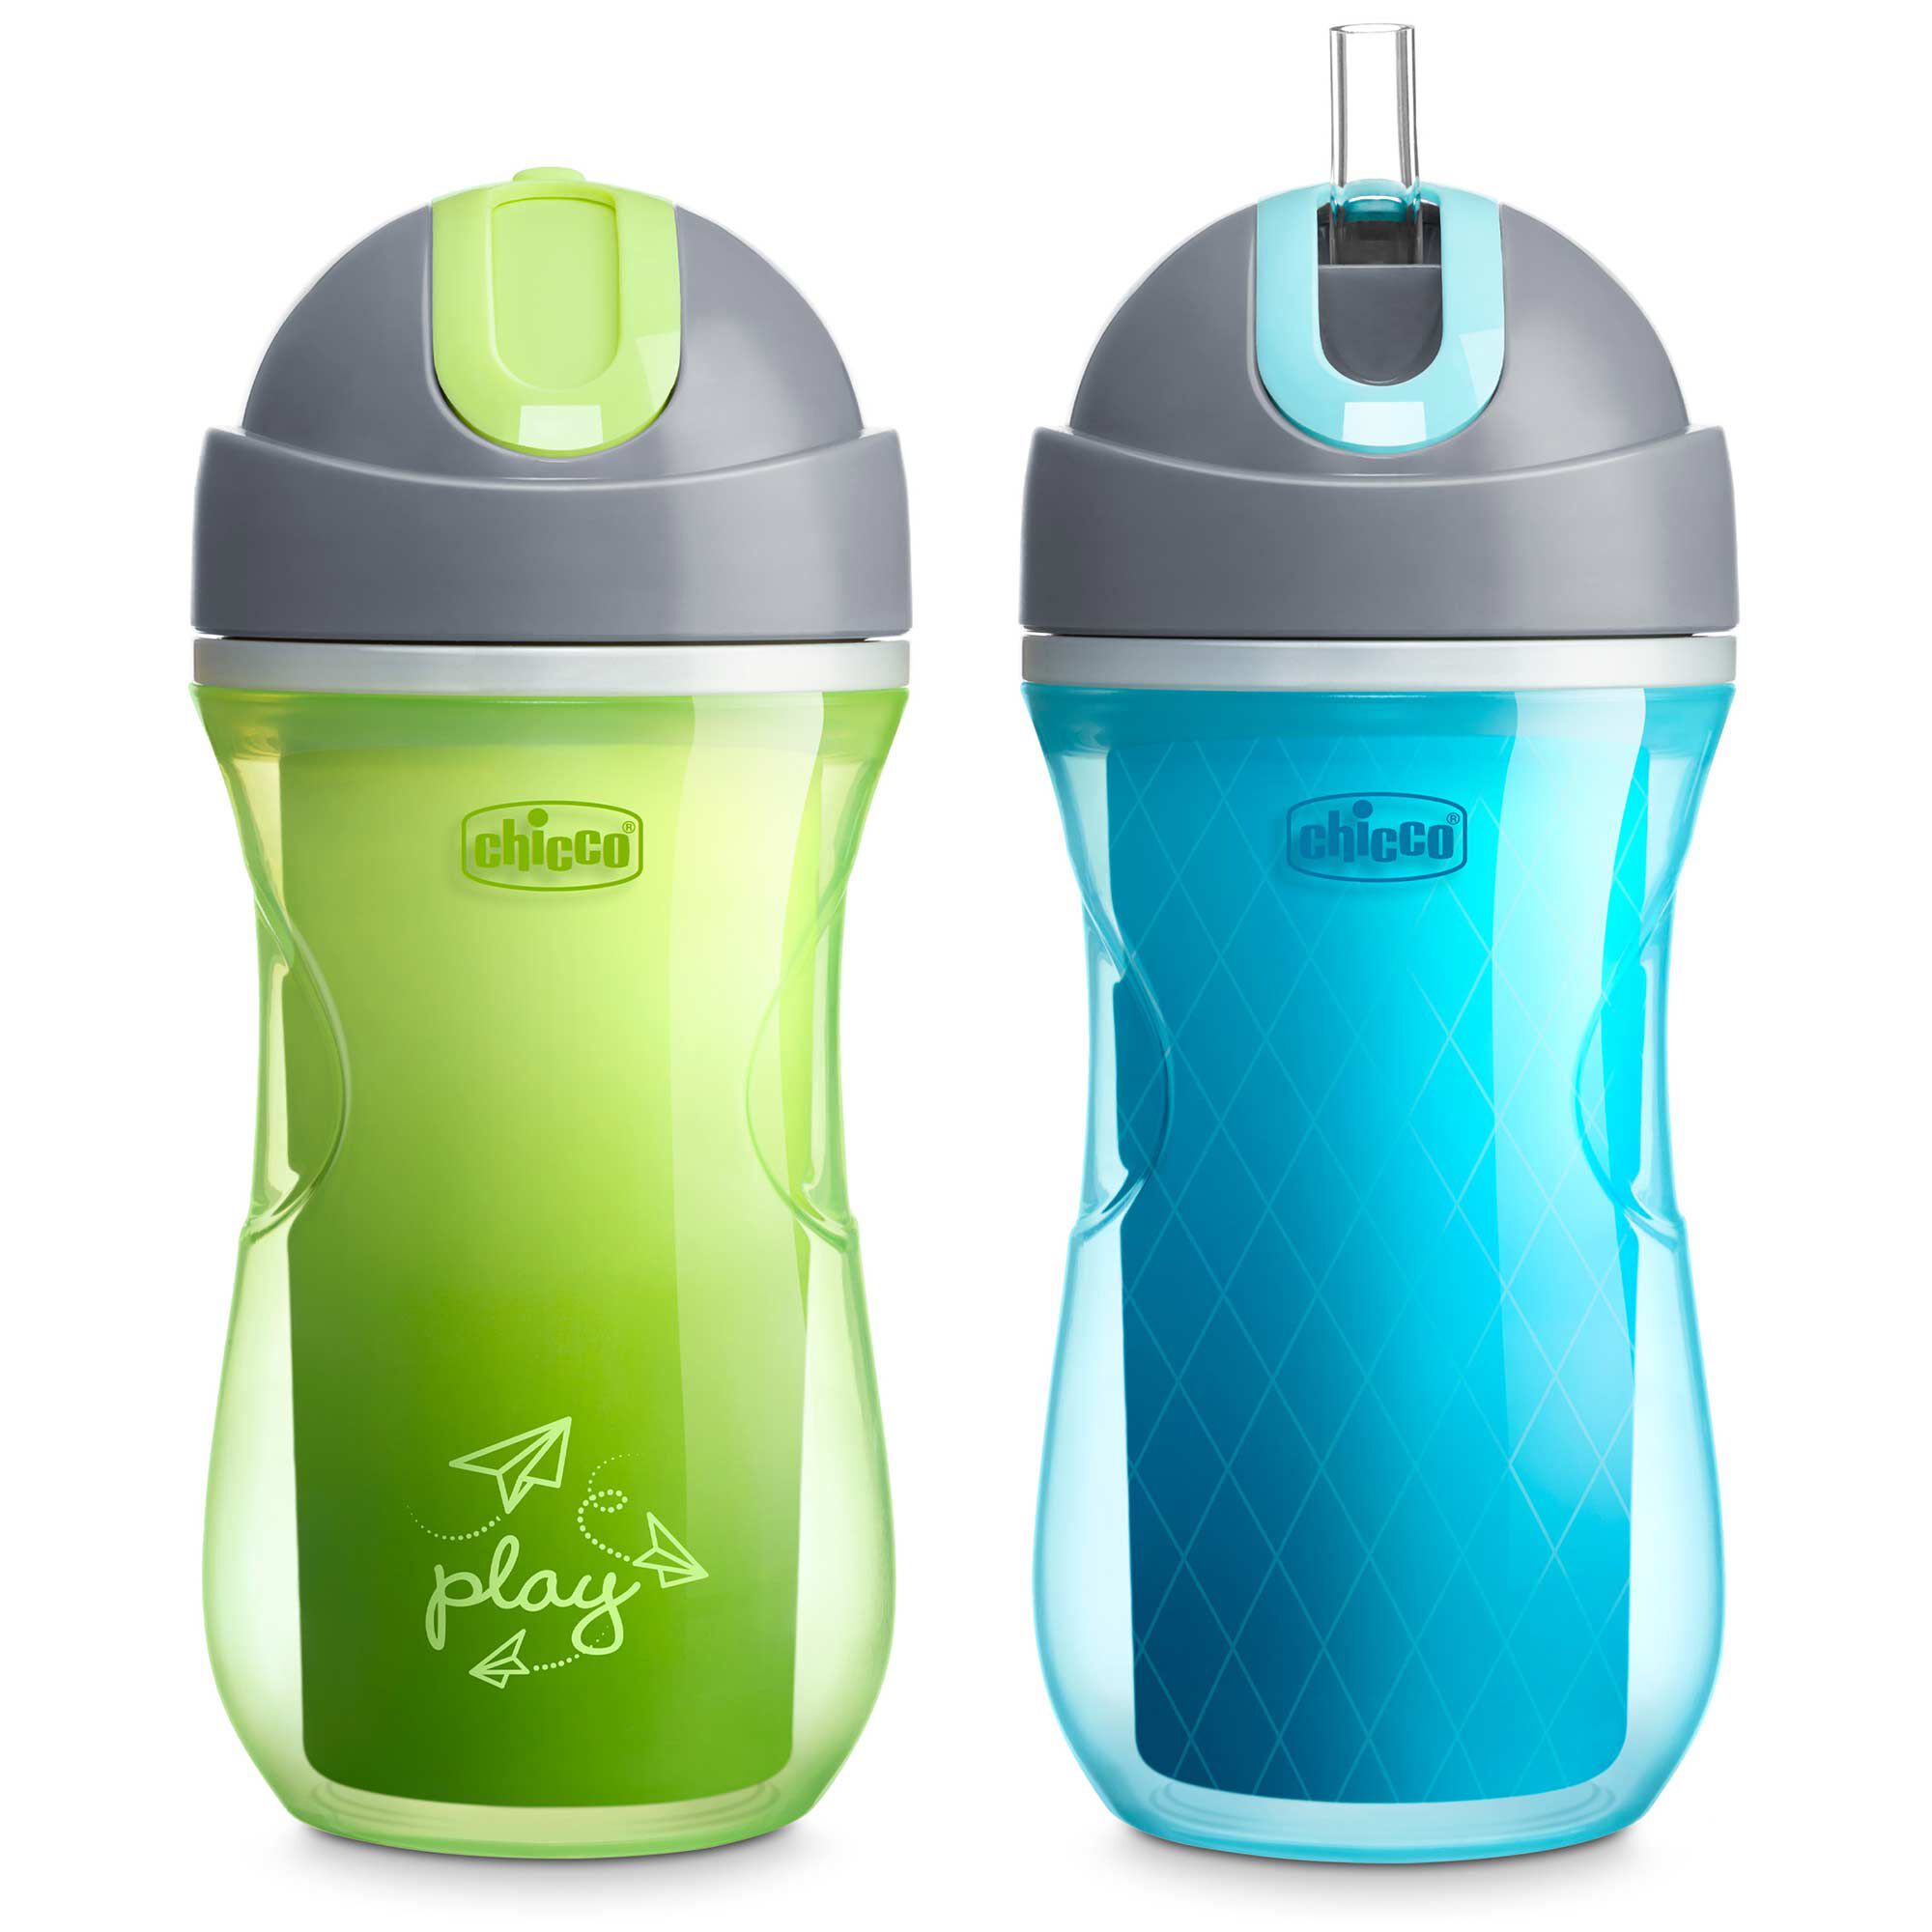 https://www.chiccousa.com/dw/image/v2/AAMT_PRD/on/demandware.static/-/Sites-chicco_catalog/default/dw60577862/images/products/feeding/insulated-flip-top-straw/chicco-insulated-flip-top-straw-cup-green-play-teal.jpg?sw=2000&sh=2000&sm=fit